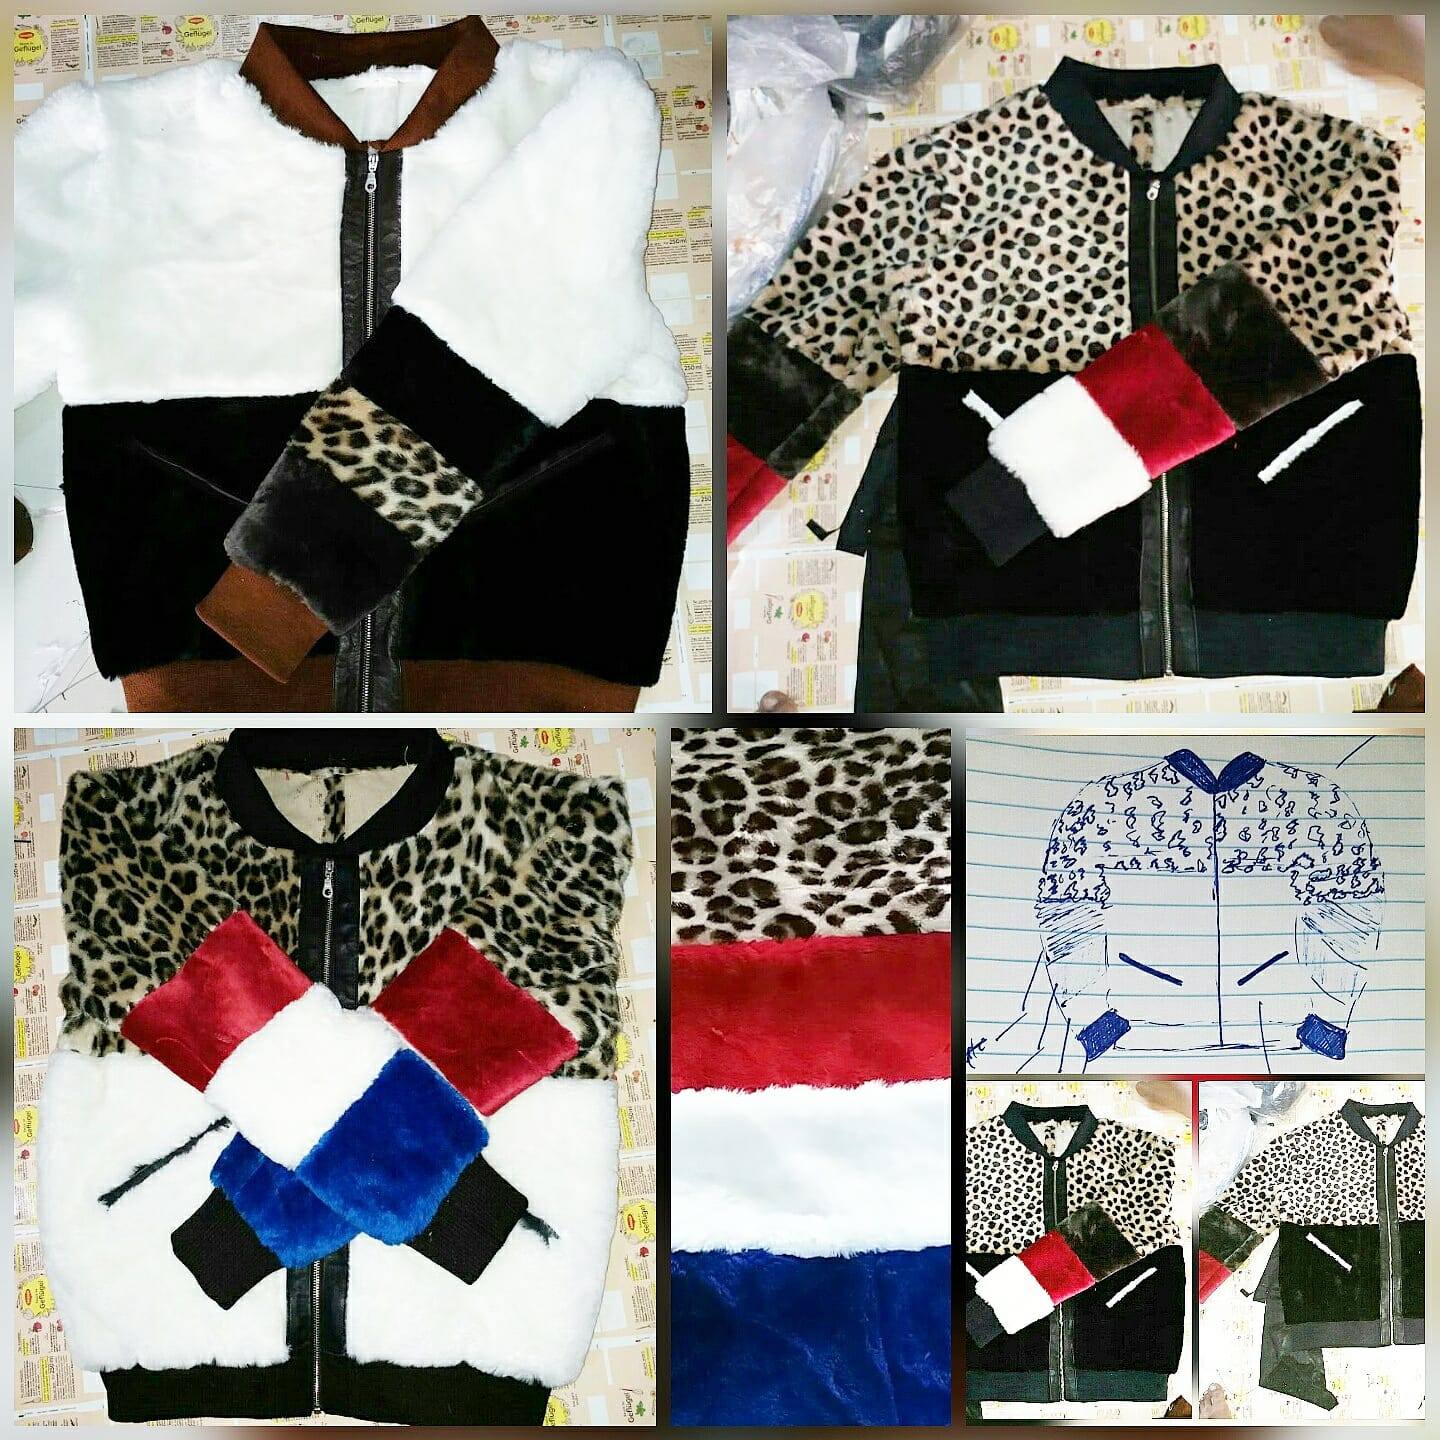 Mixed fur bombers - Reps And Scales